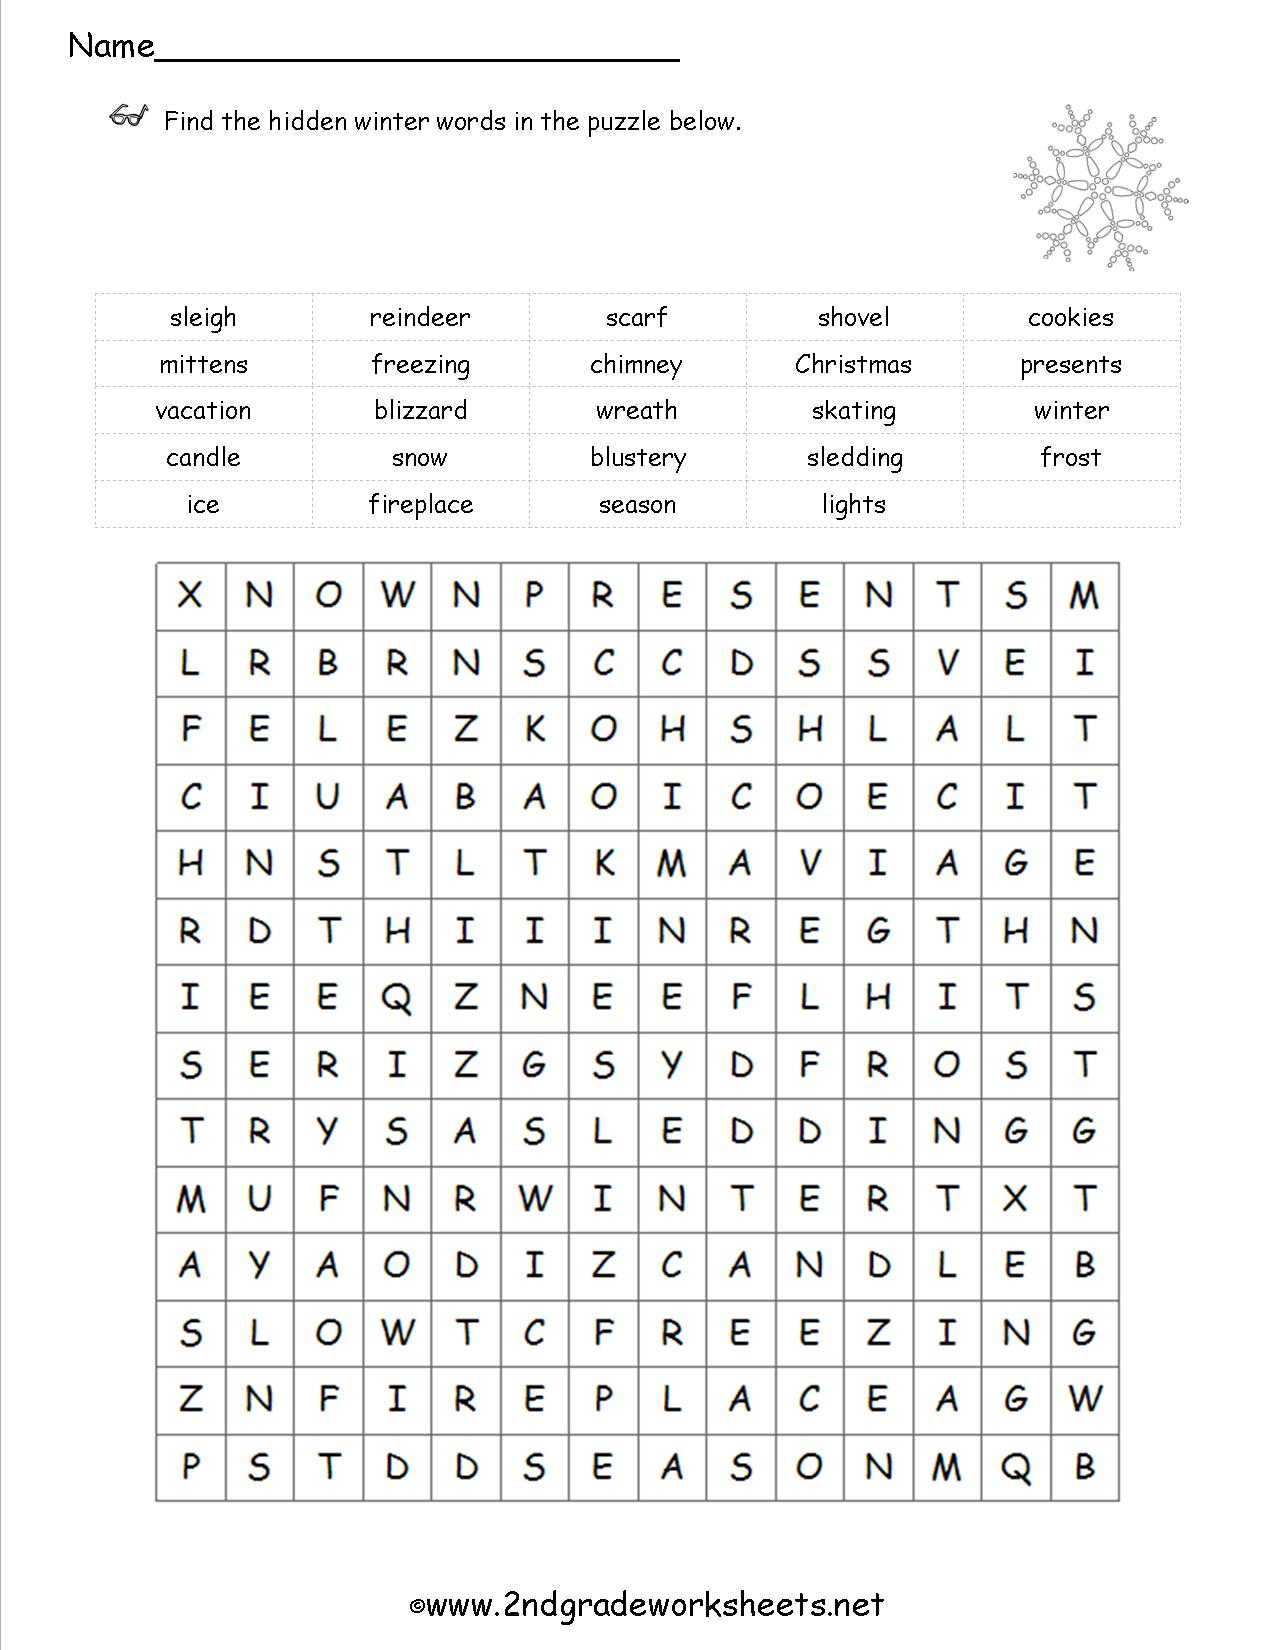 Christmas Worksheets And Printouts - Free Printable Christmas | Free Printable Christmas Worksheets For Third Grade